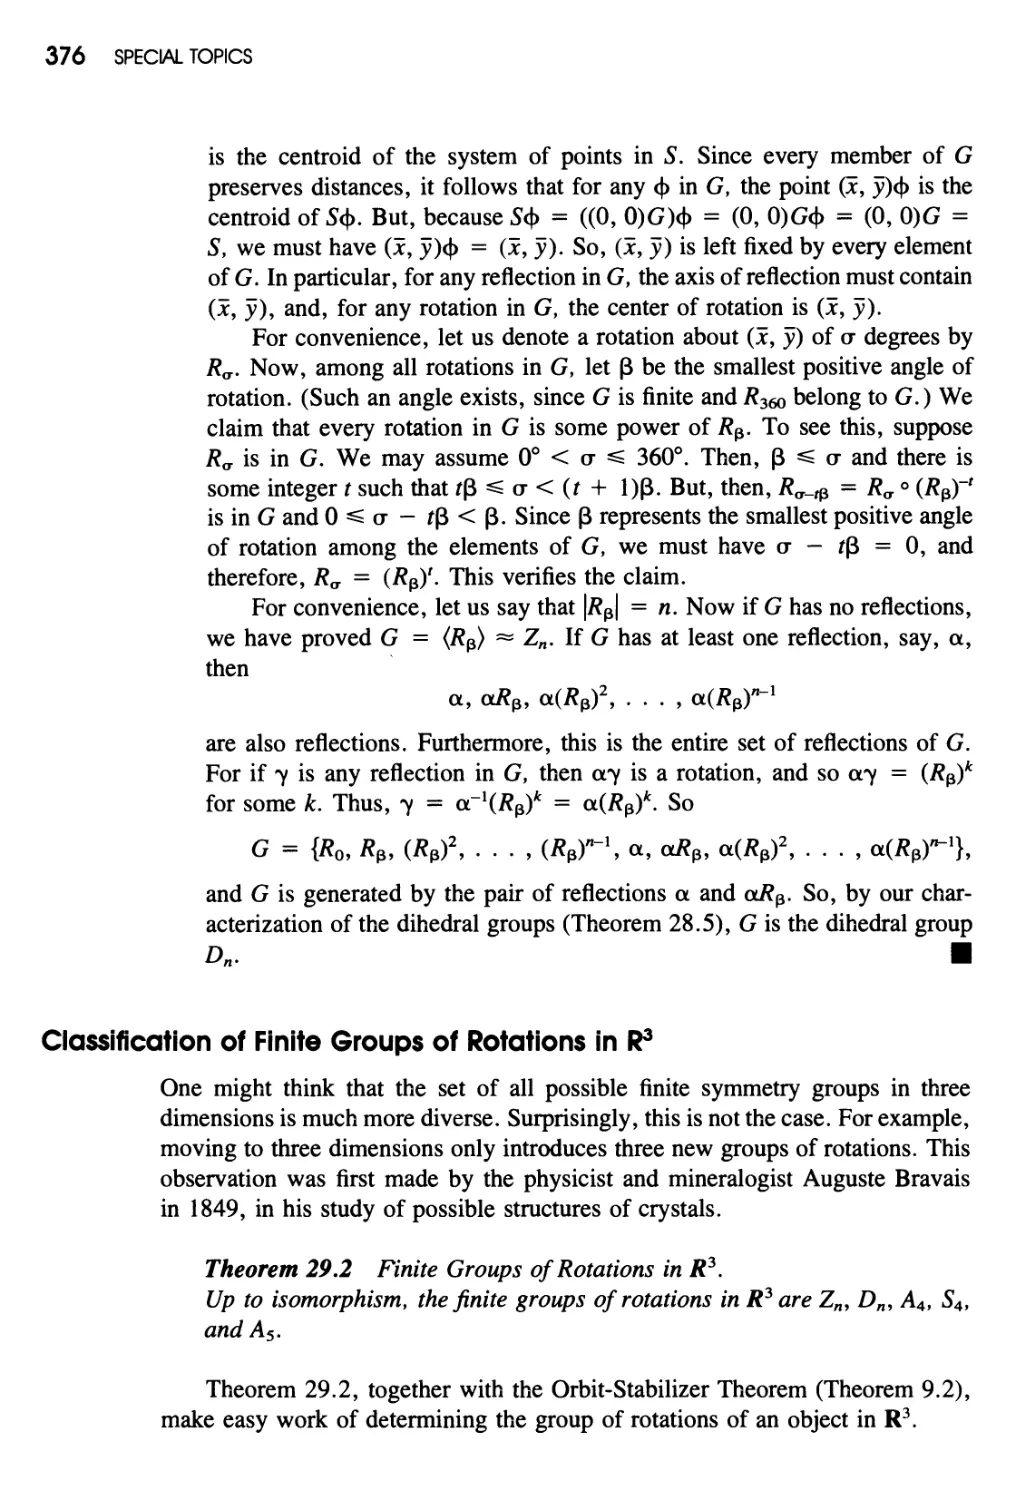 Classification of Finite Groups of Rotations in $\mathbb{R}^3$